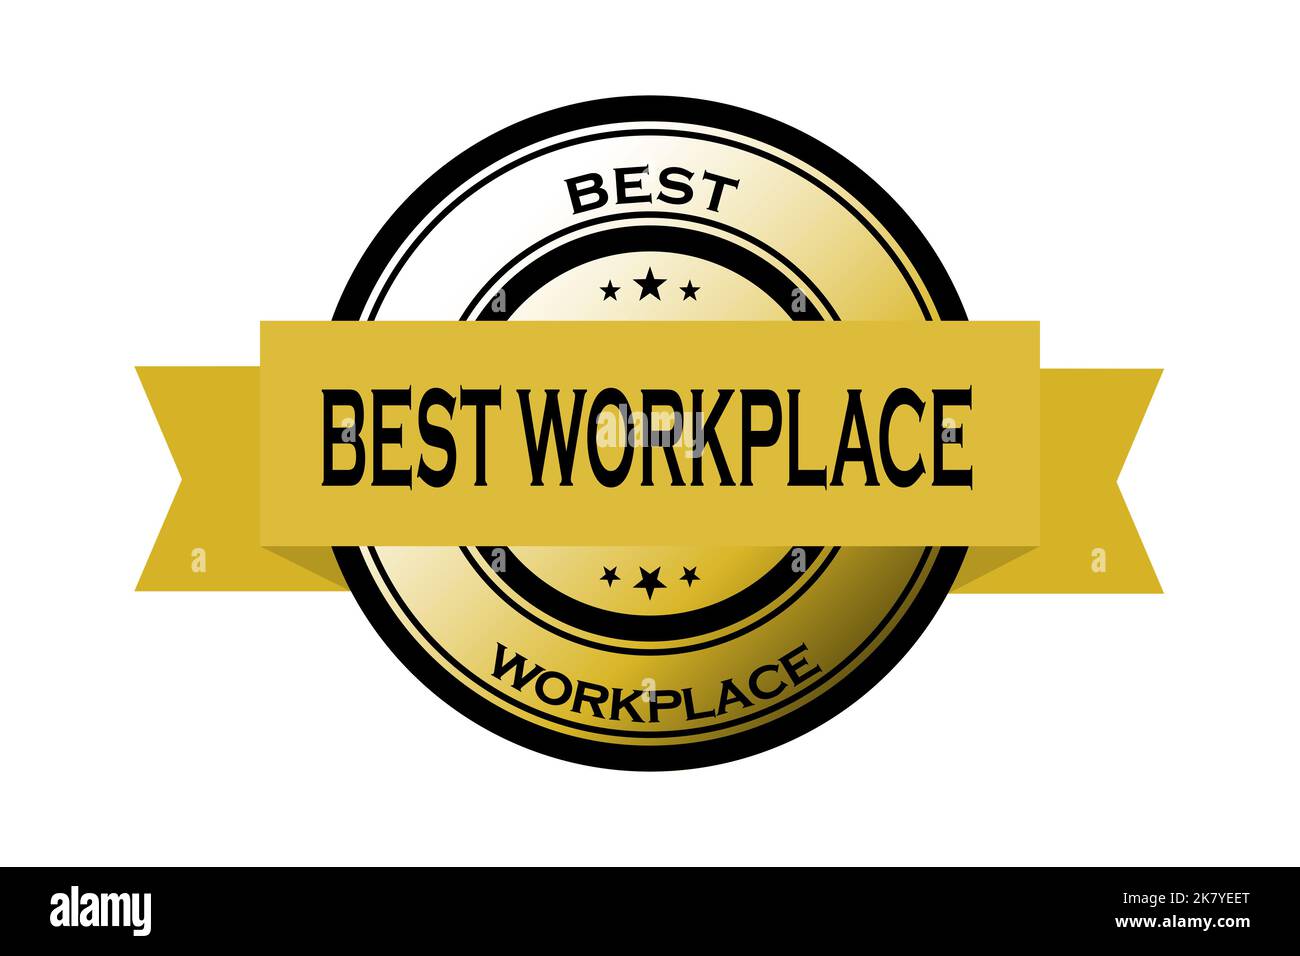 Best workplace badge with a ribbon., symbolizing company efforts to achieve superb employee satisfaction. Stock Photo